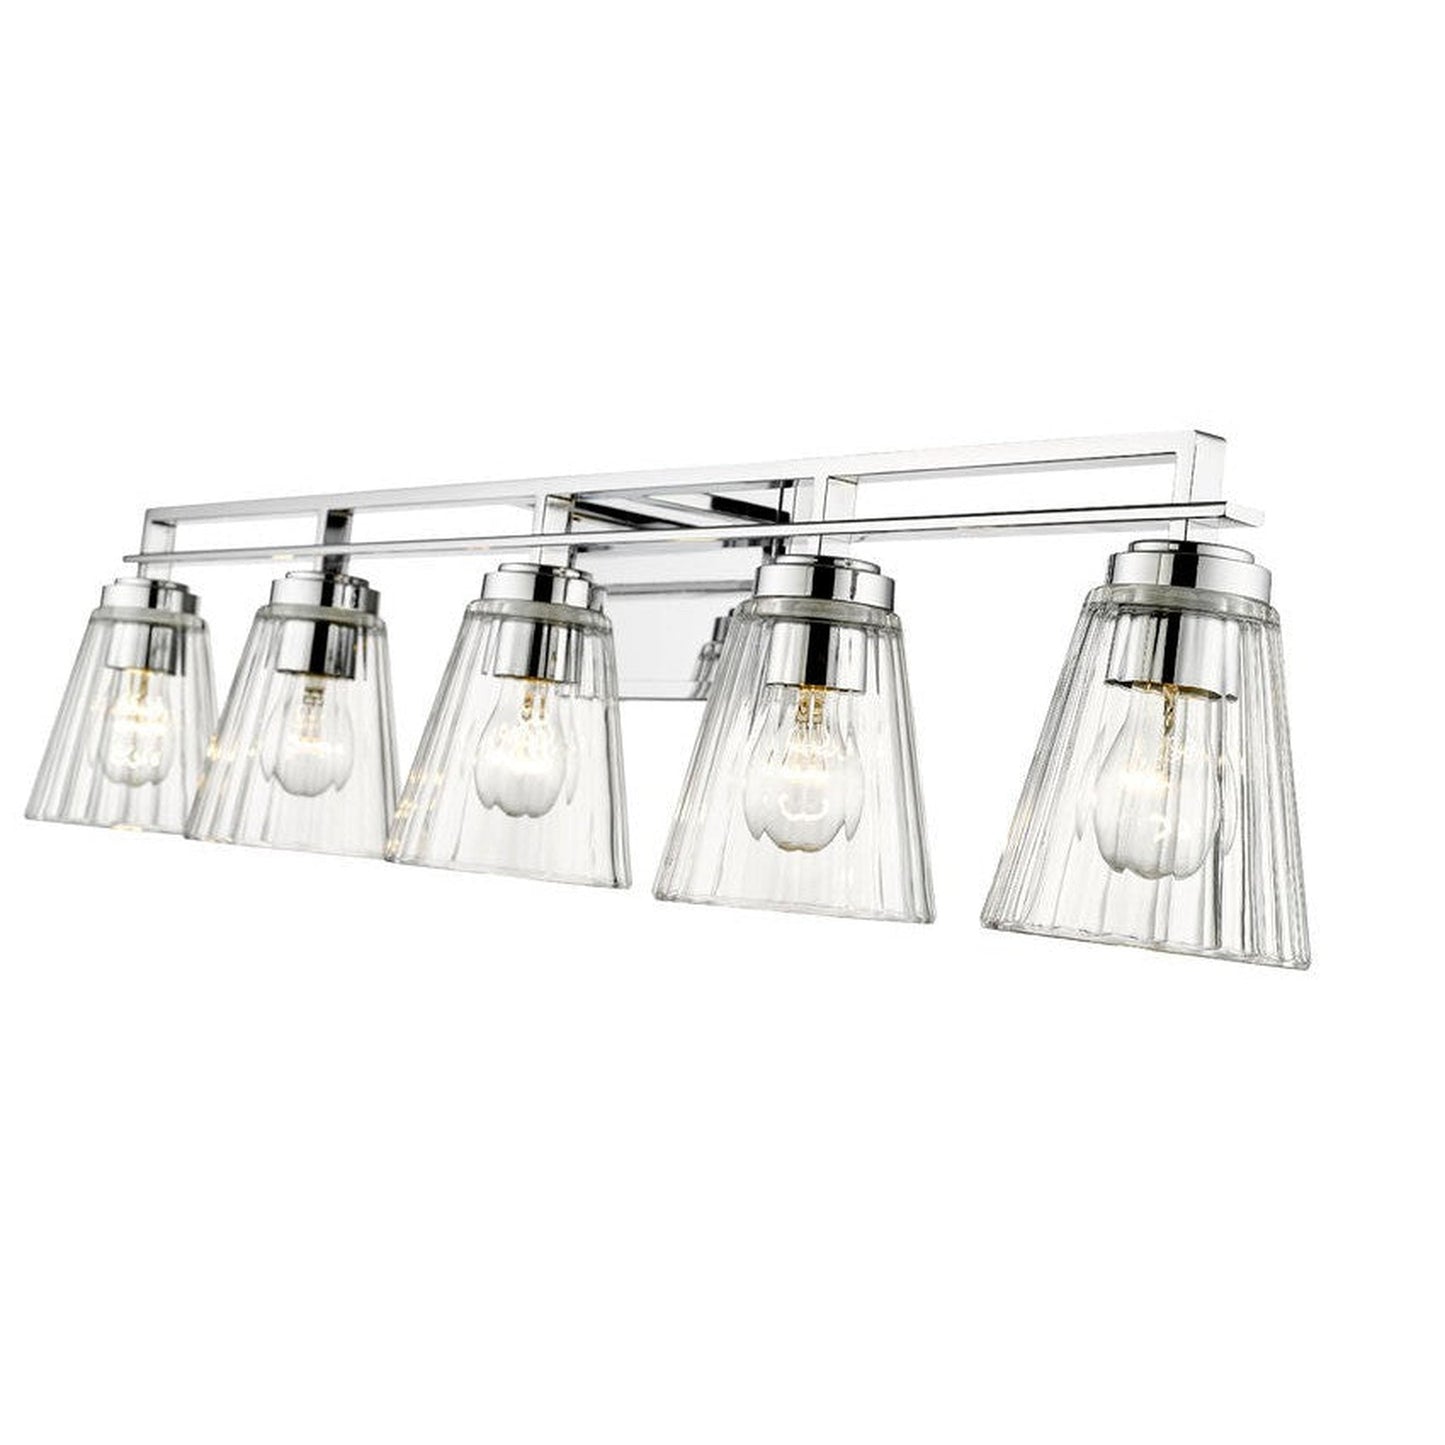 Z-Lite Lyna 39" 5-Light Chrome and Clear Glass Shade Vanity Light